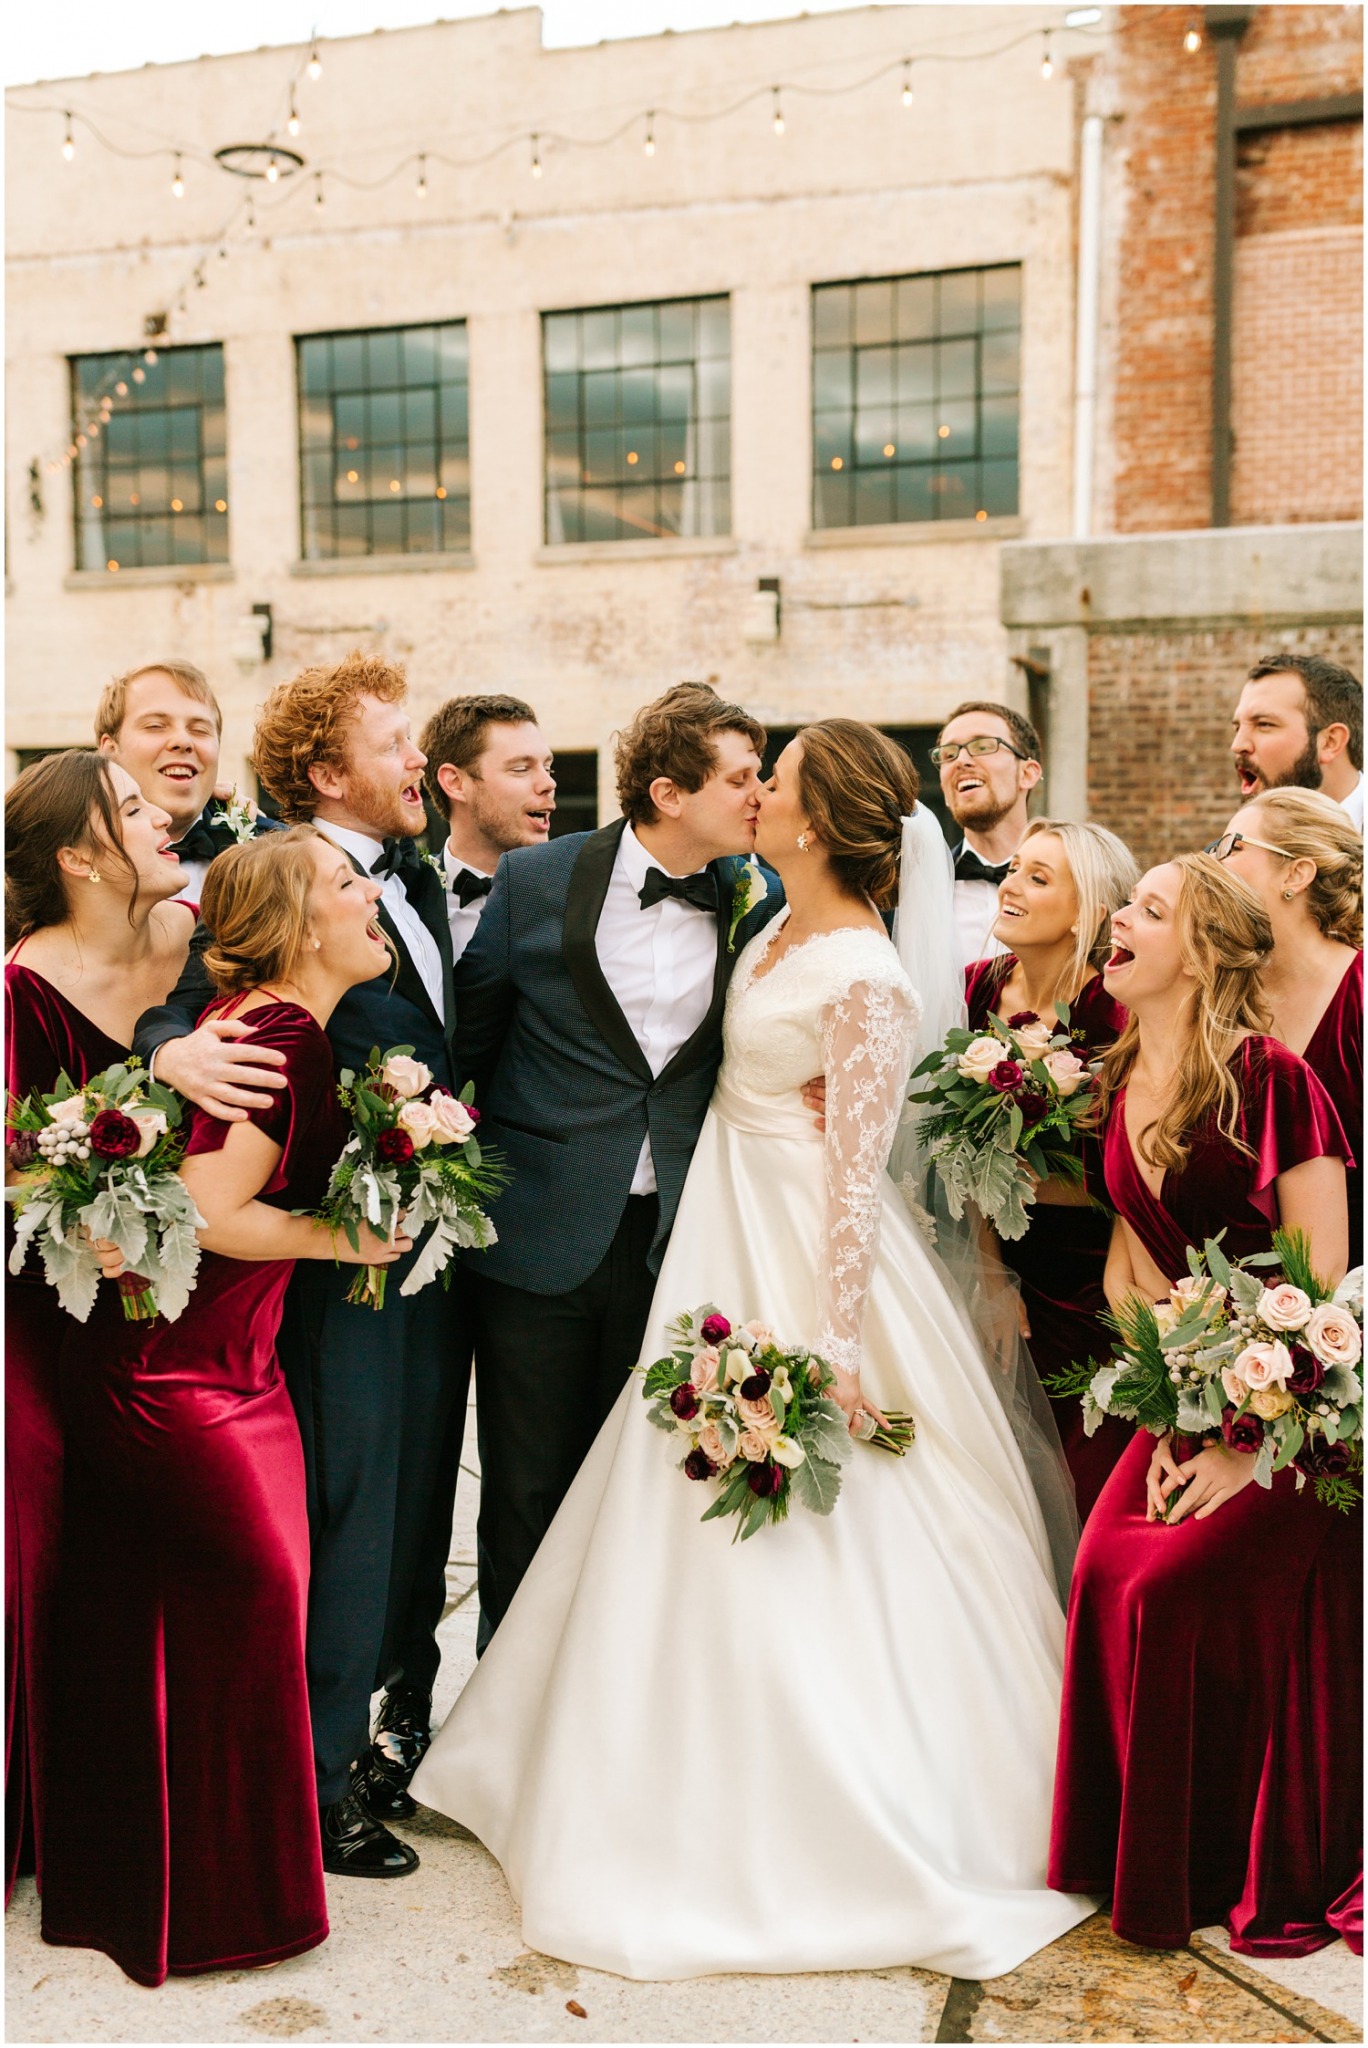 Chelsea Renay Photography photographs bride and groom with bridal party for winter wedding